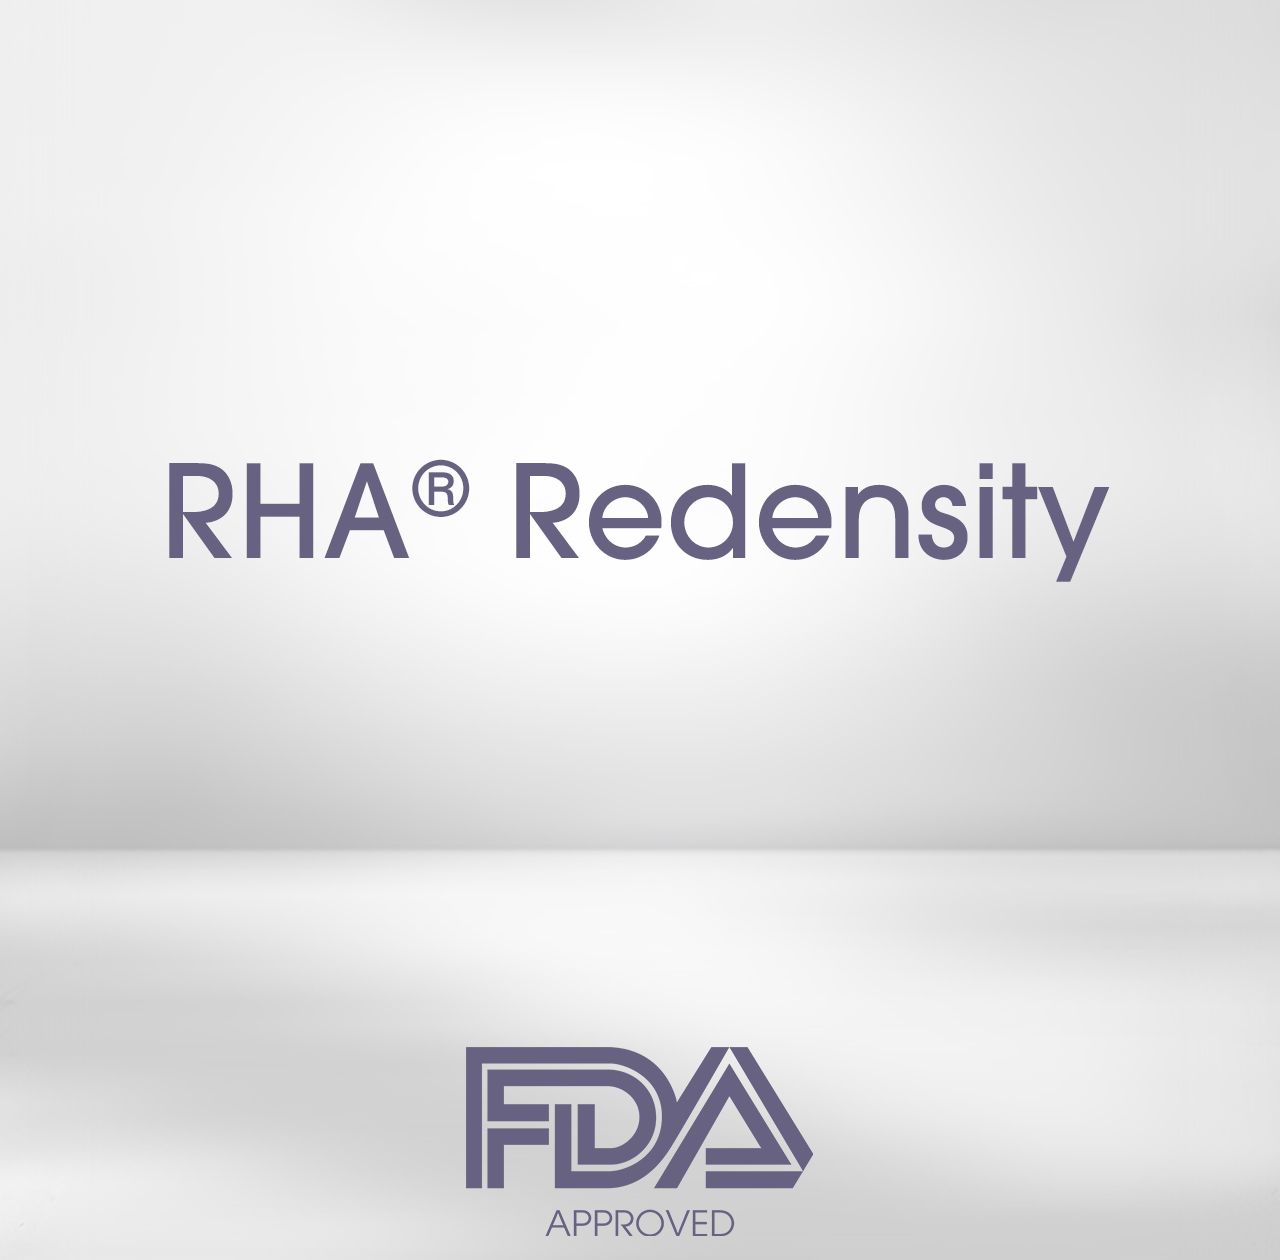 Teoxane receives U.S. FDA approval for RHA® Redensity’s first indication